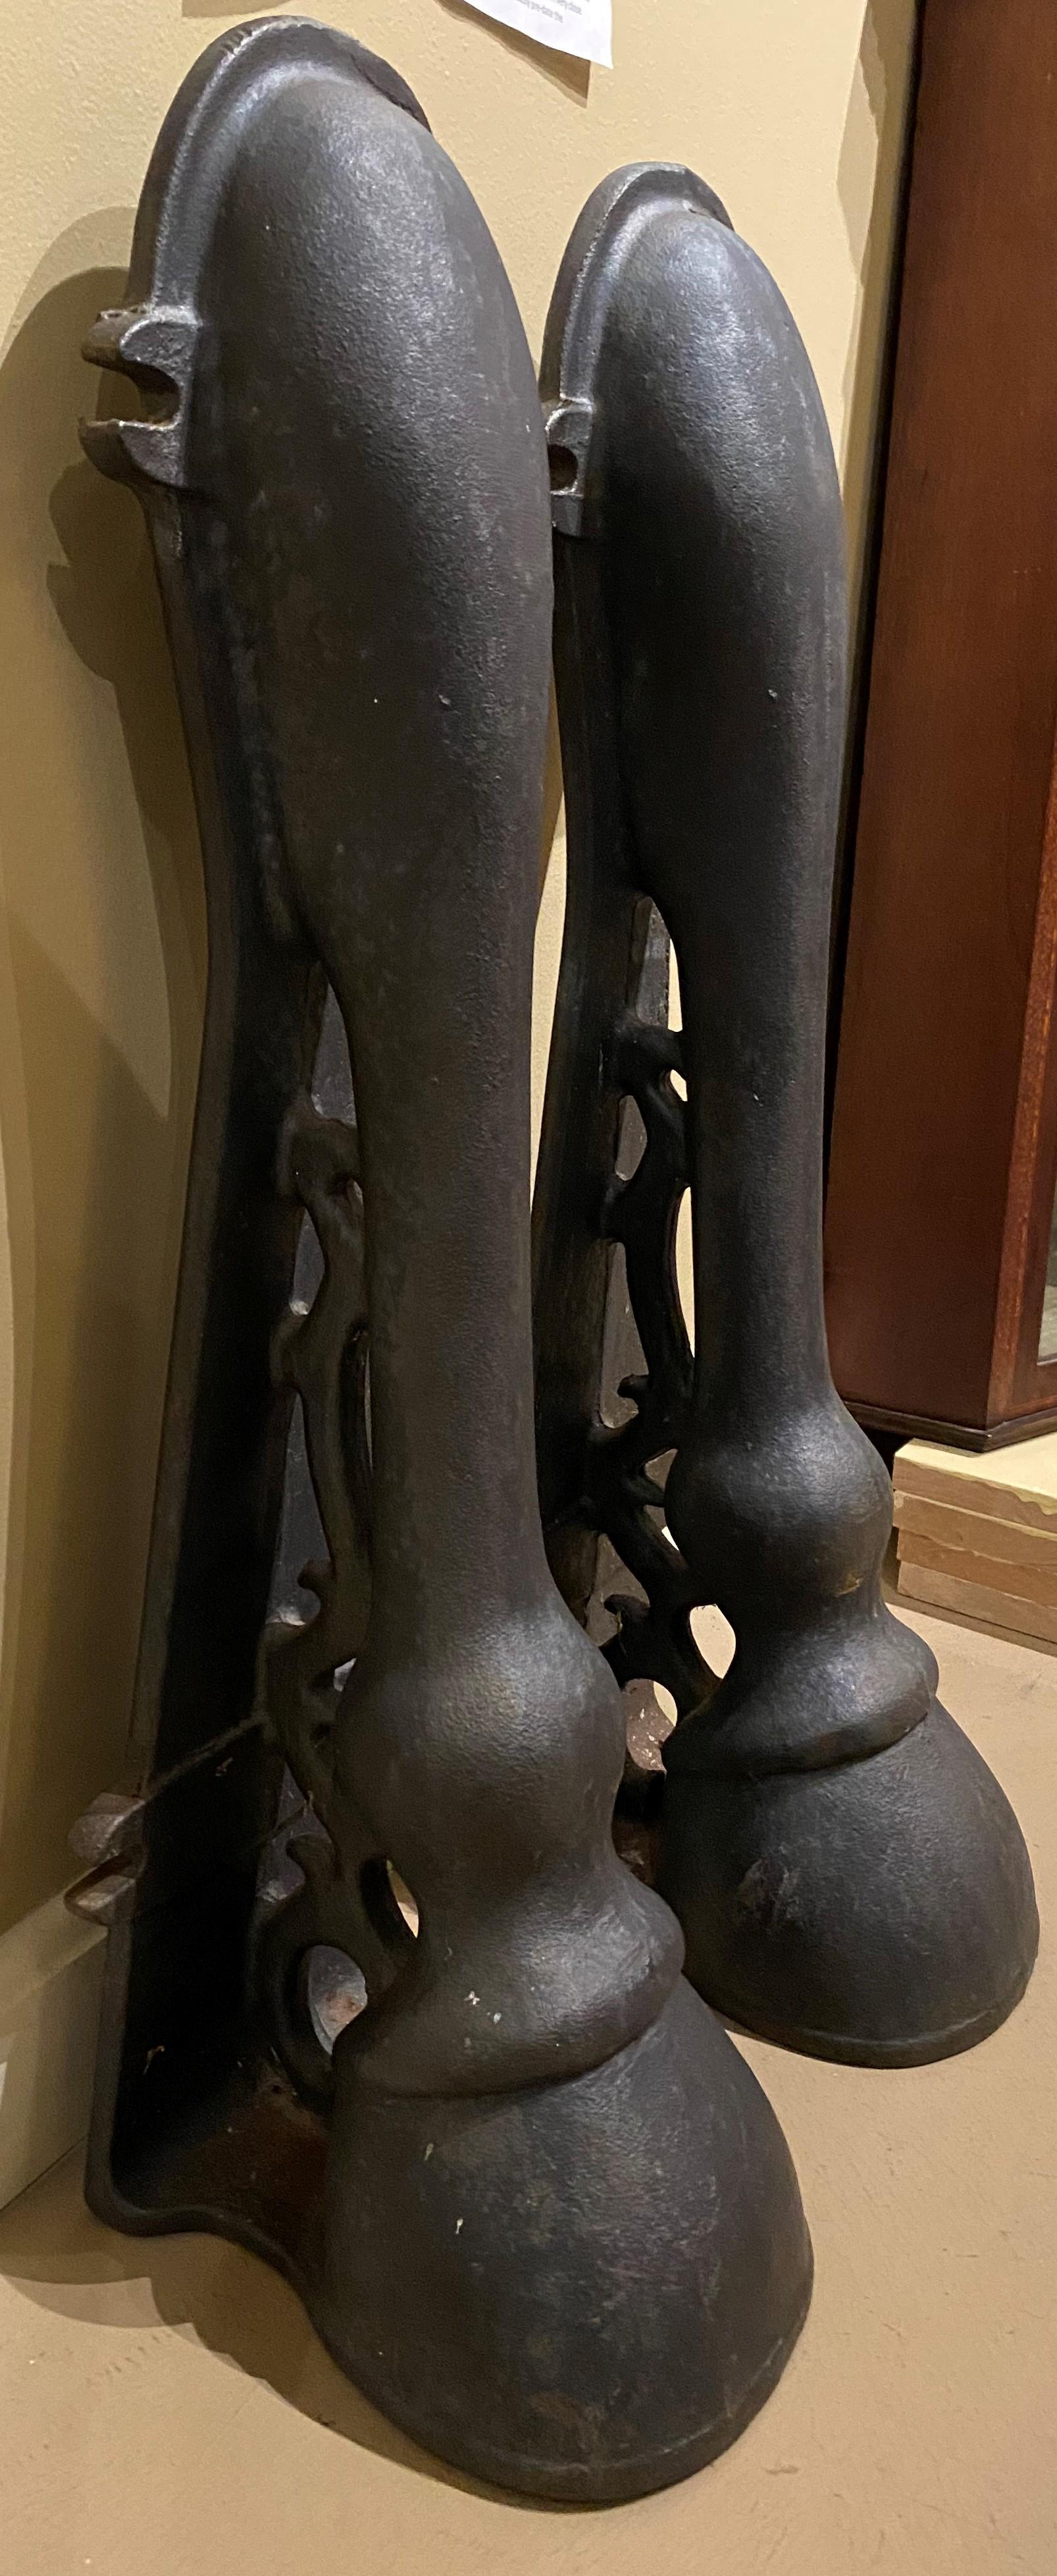 A fine pair of unusual form cast iron horse leg building fenders or carriage guides attributed to William Adams, a Philadelphia iron worker (b.1833). Adams, who after being in partnership under the name Williams & Storrie Iron Foundry in the late